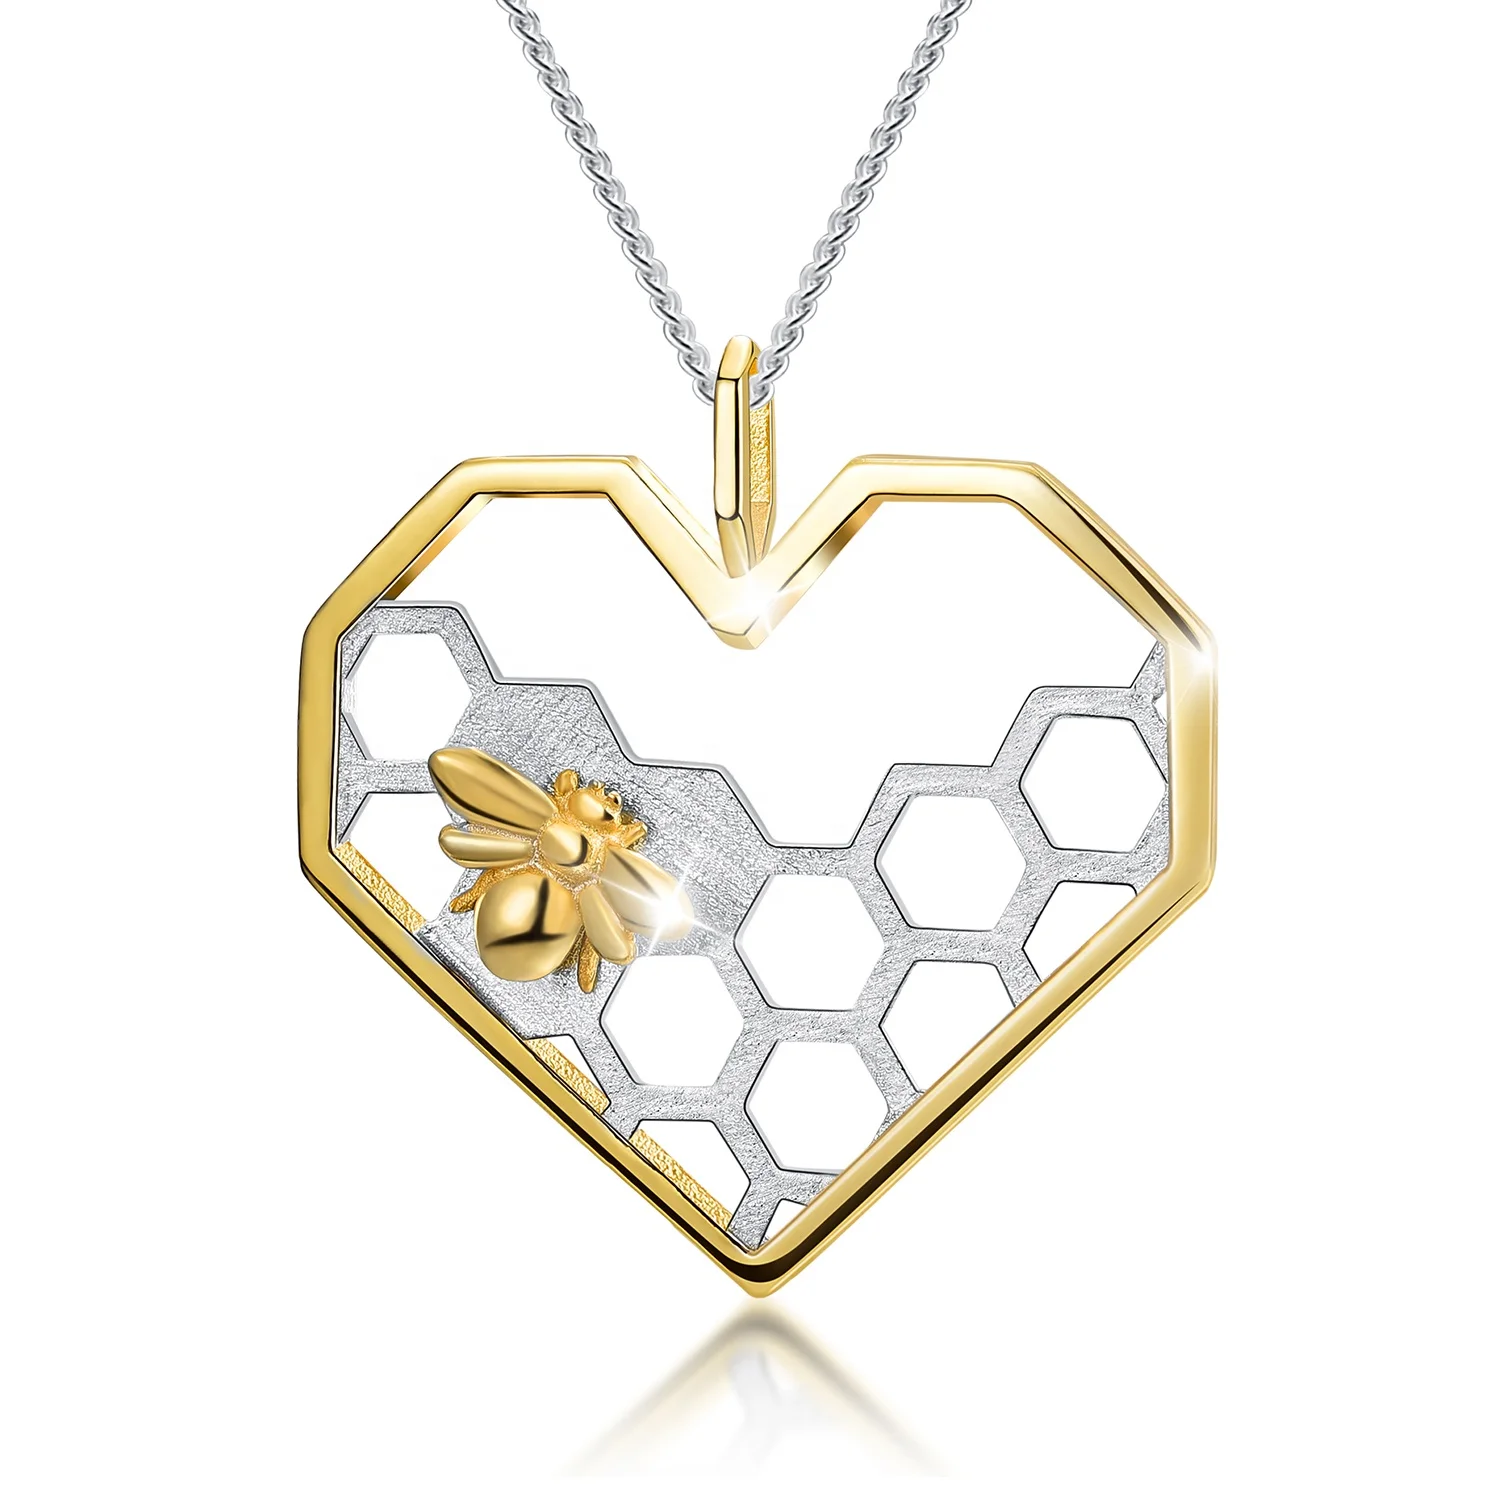 

Wholesale Creative 925 Silver Jewelry Honeycomb Home Guard Love Heart Shape Pendant For Women New Year 2019